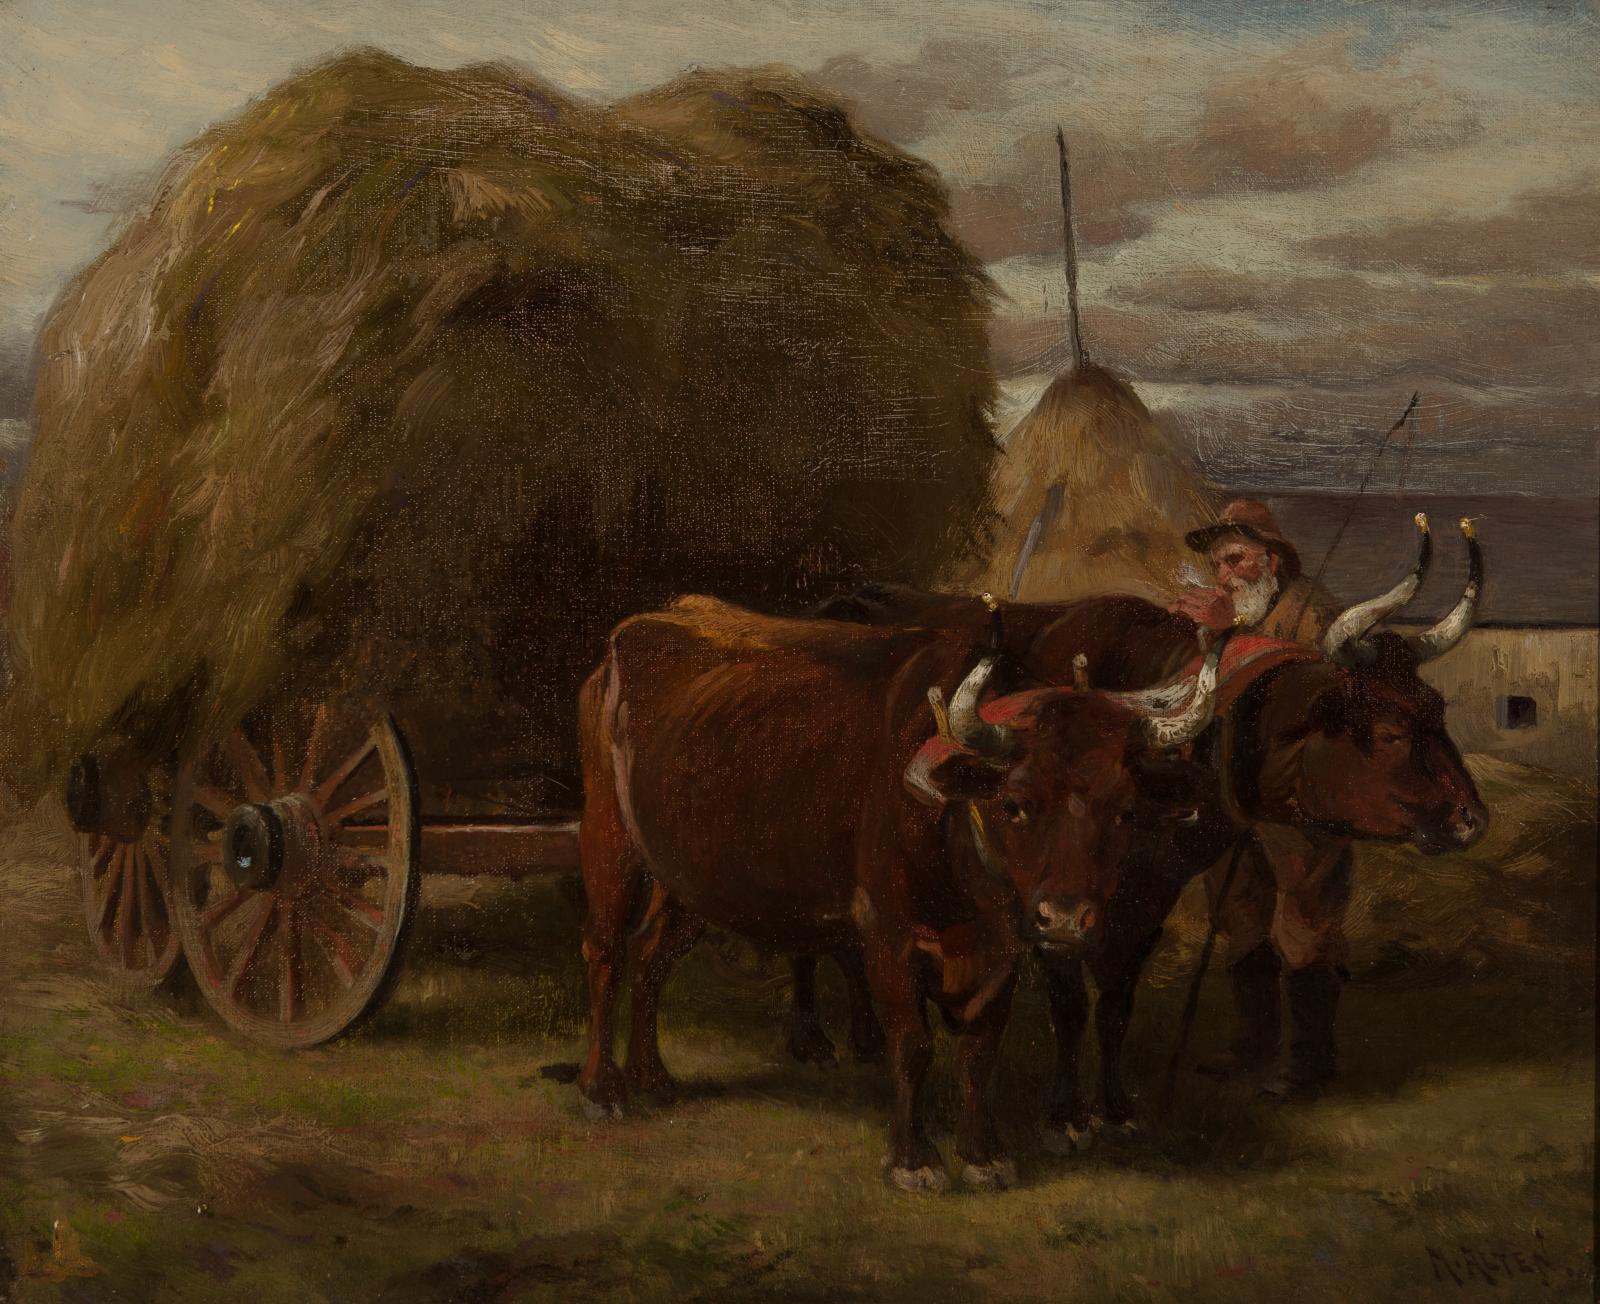 Man with a cart of hay being pulled by two large oxen.